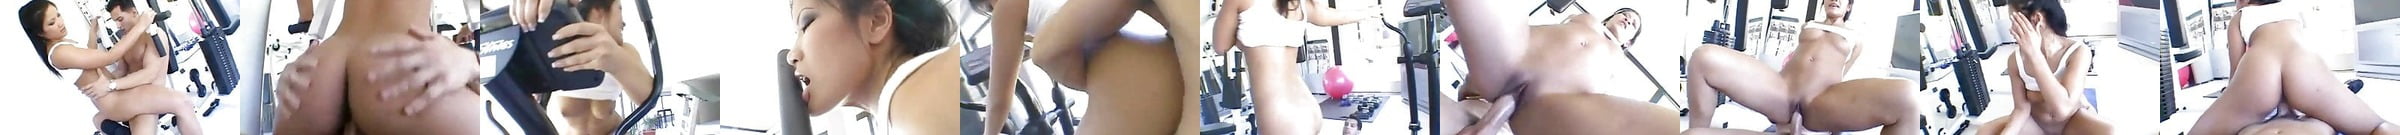 The Real Workout Porn Videos Xhamster